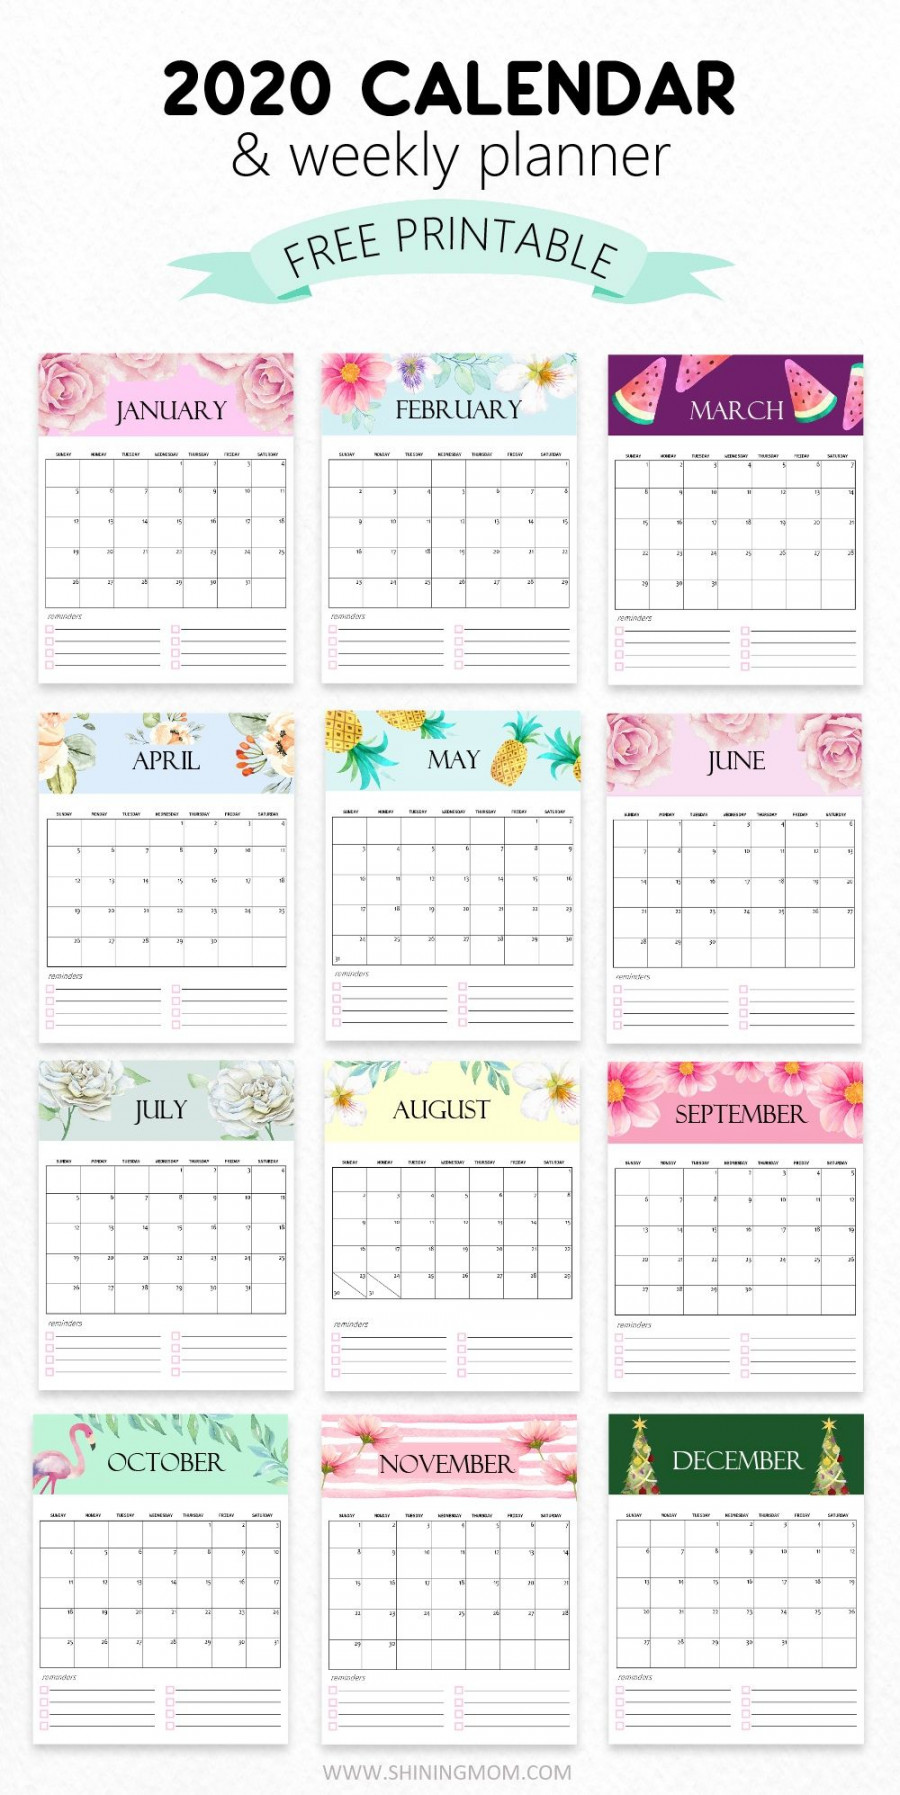 FREE Calendar  Printable:  Cute Monthly Designs to Love